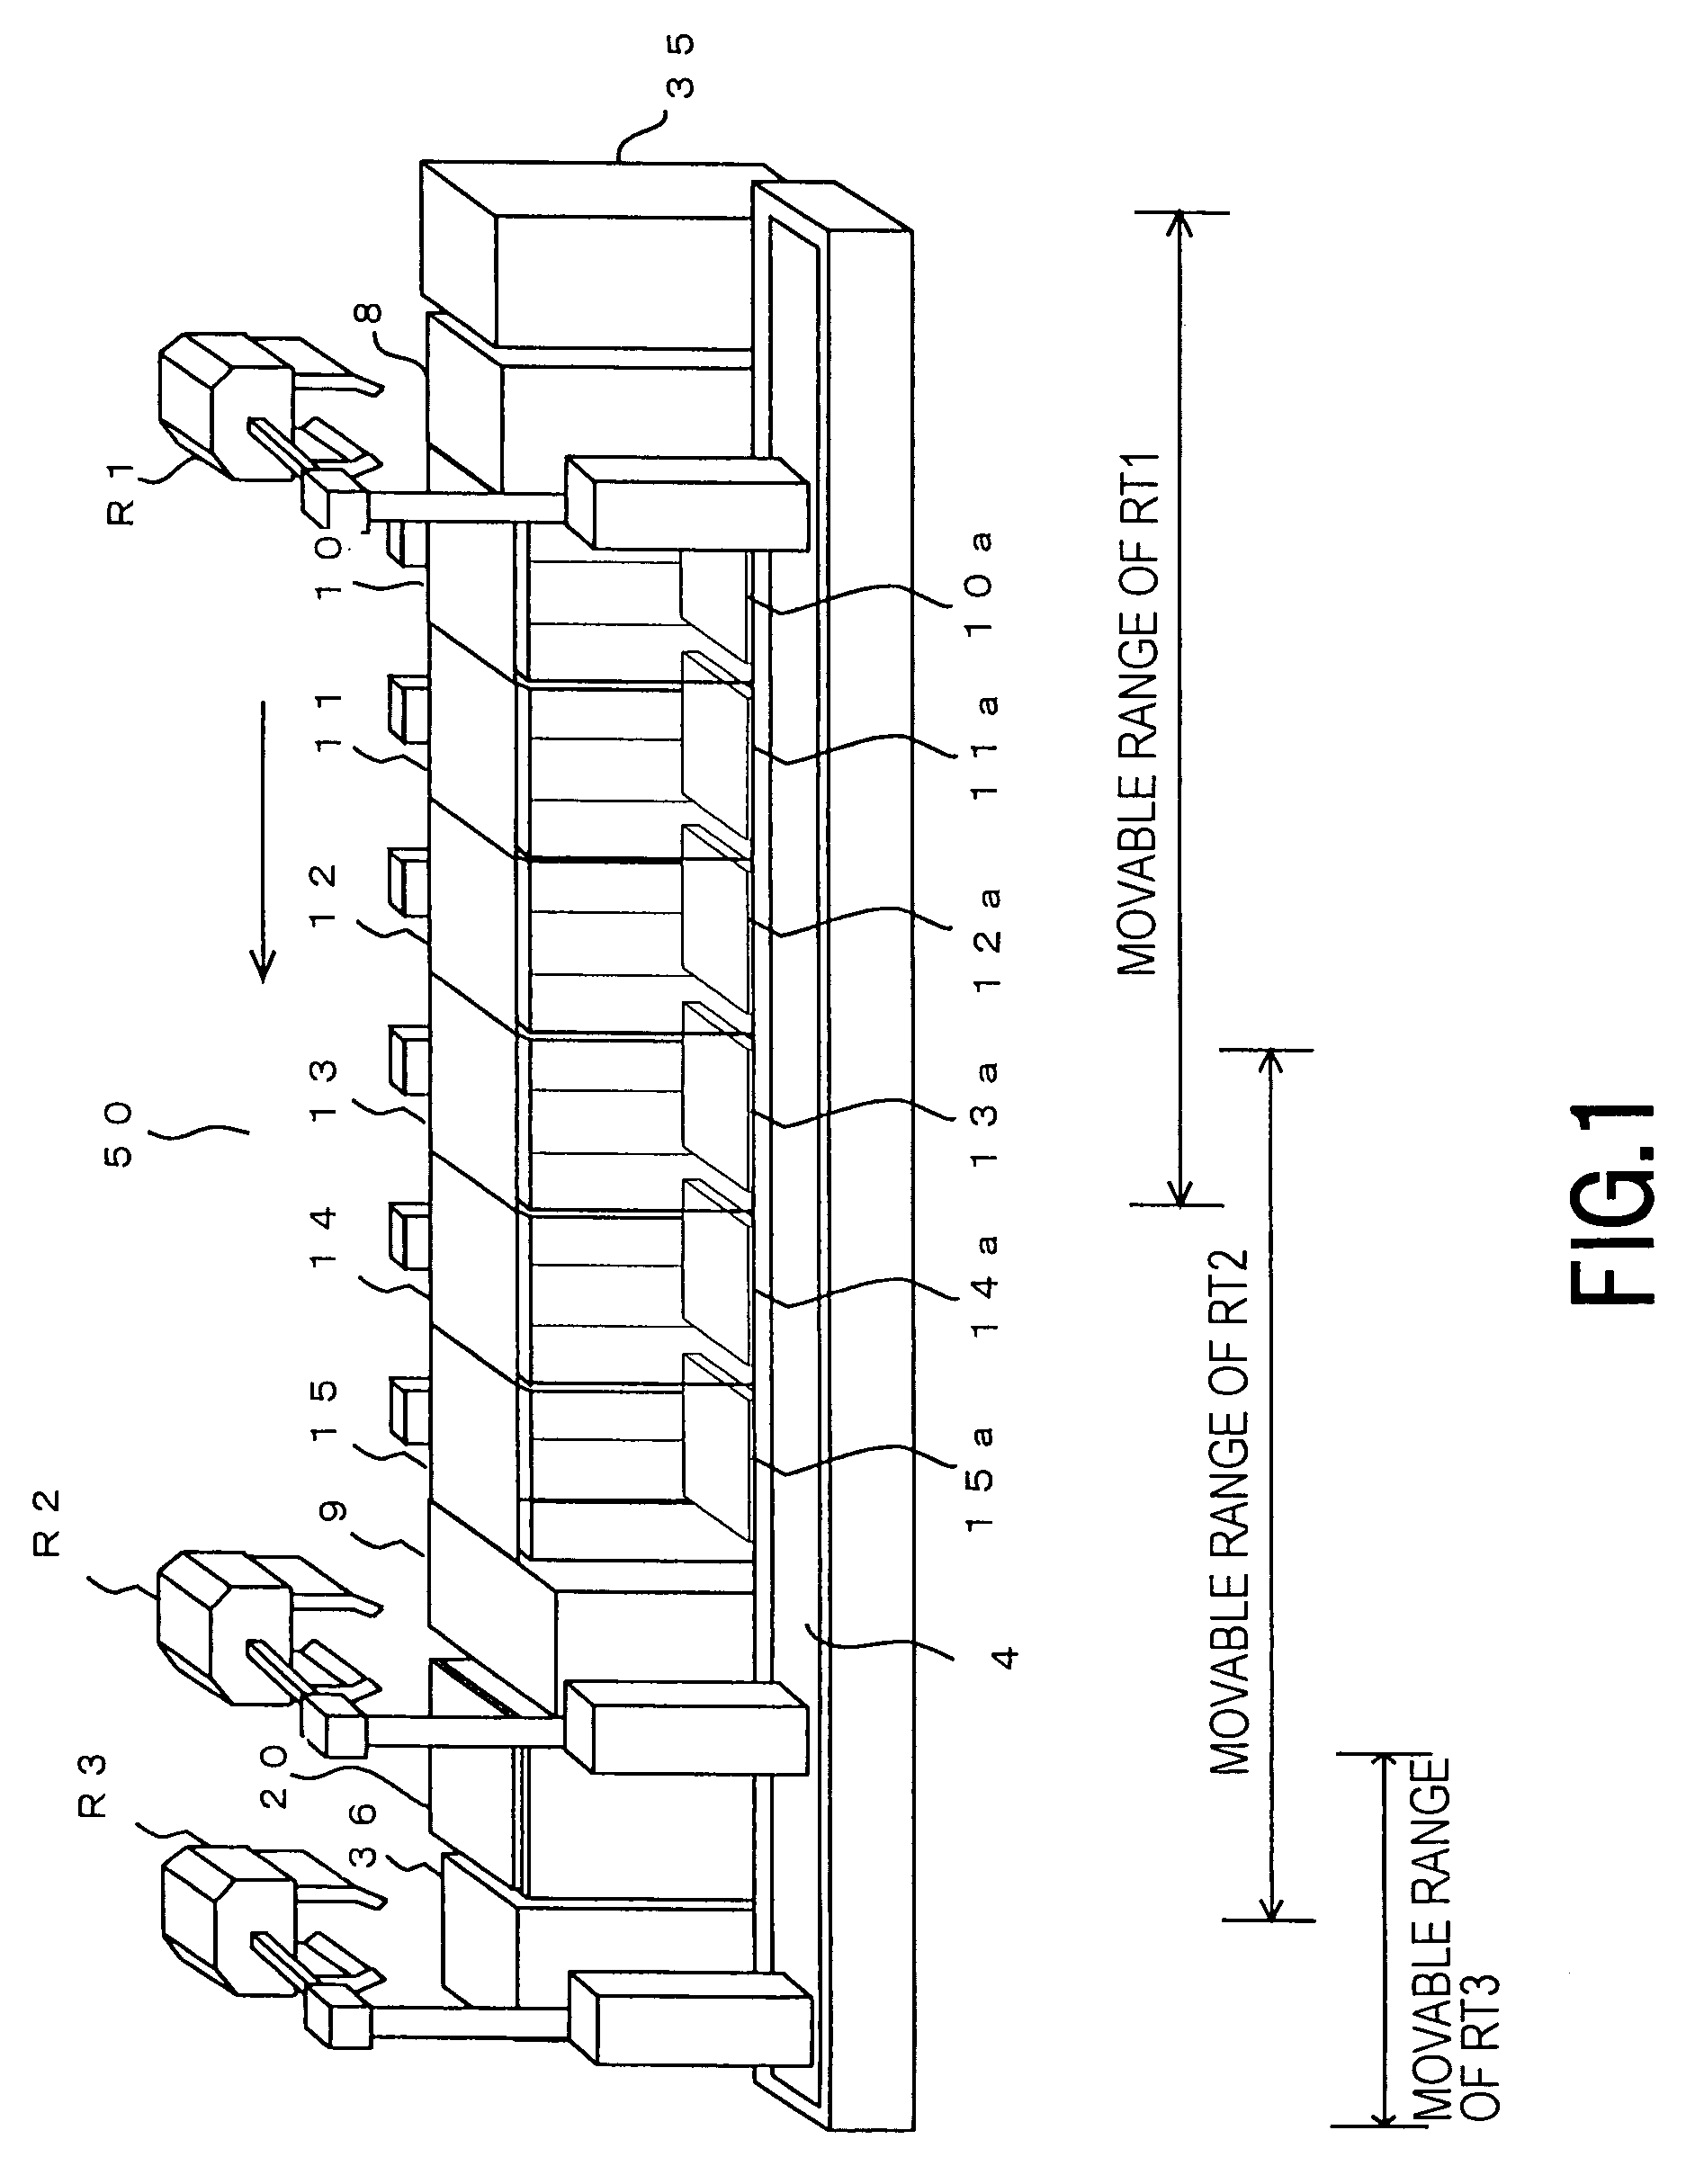 Substrate processing apparatus and substrate transporting device mounted thereto